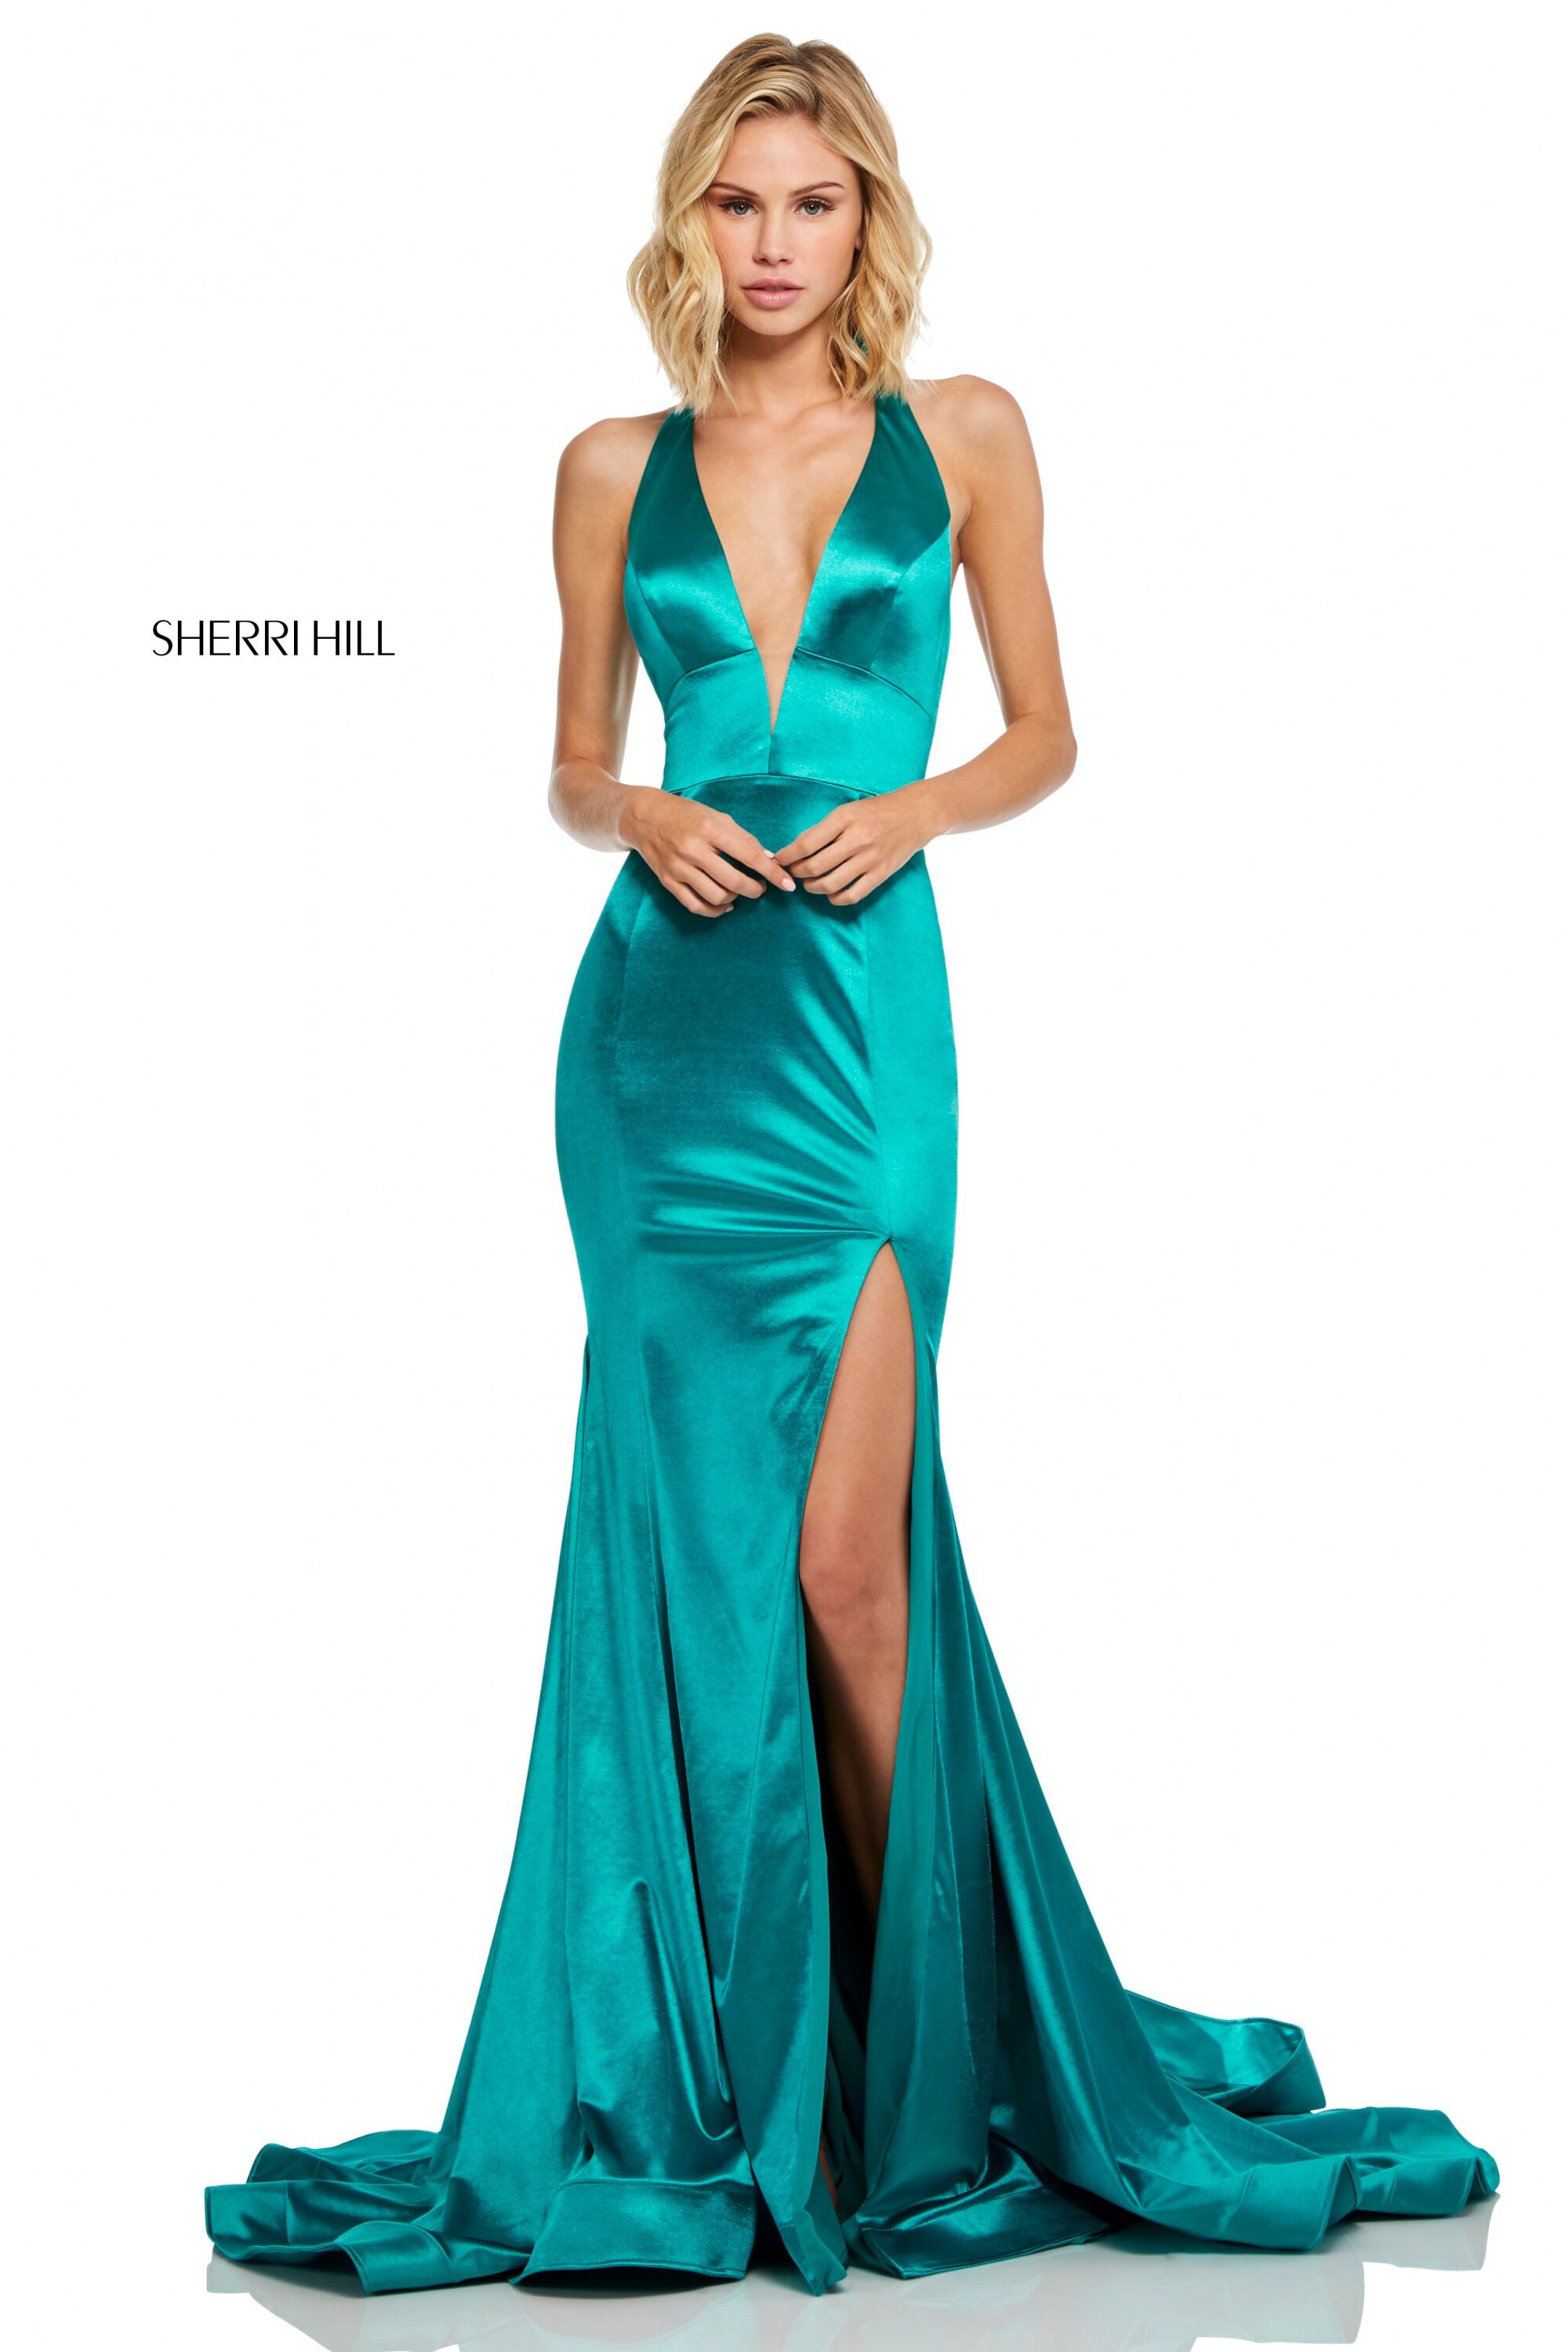 style № 52702 designed by SherriHill